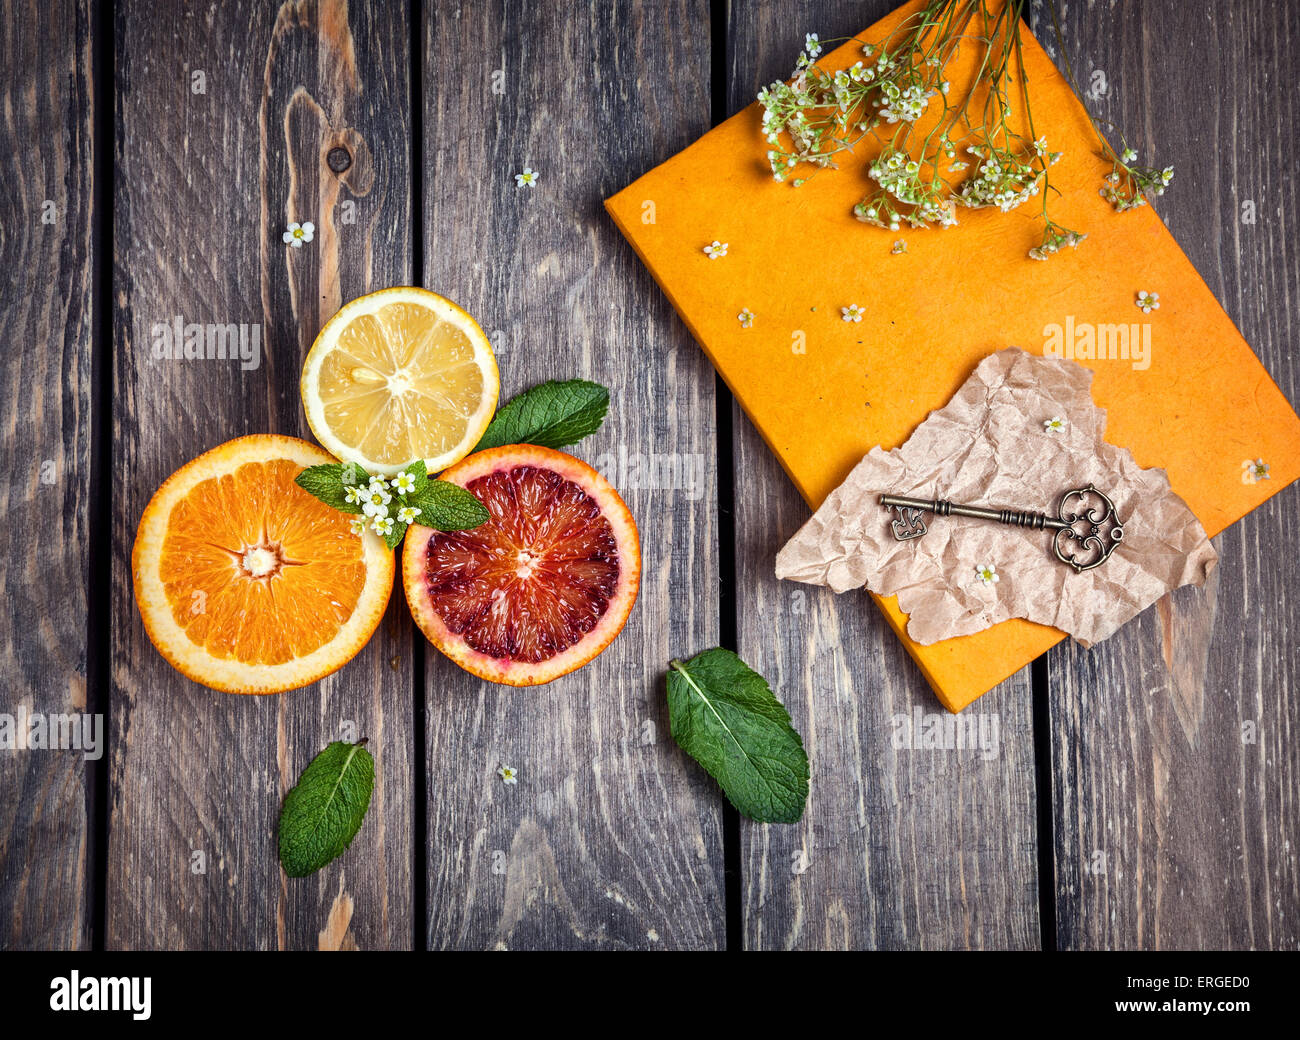 Oranges, lemon, yellow notebook, key and white flowers at wooden background Stock Photo